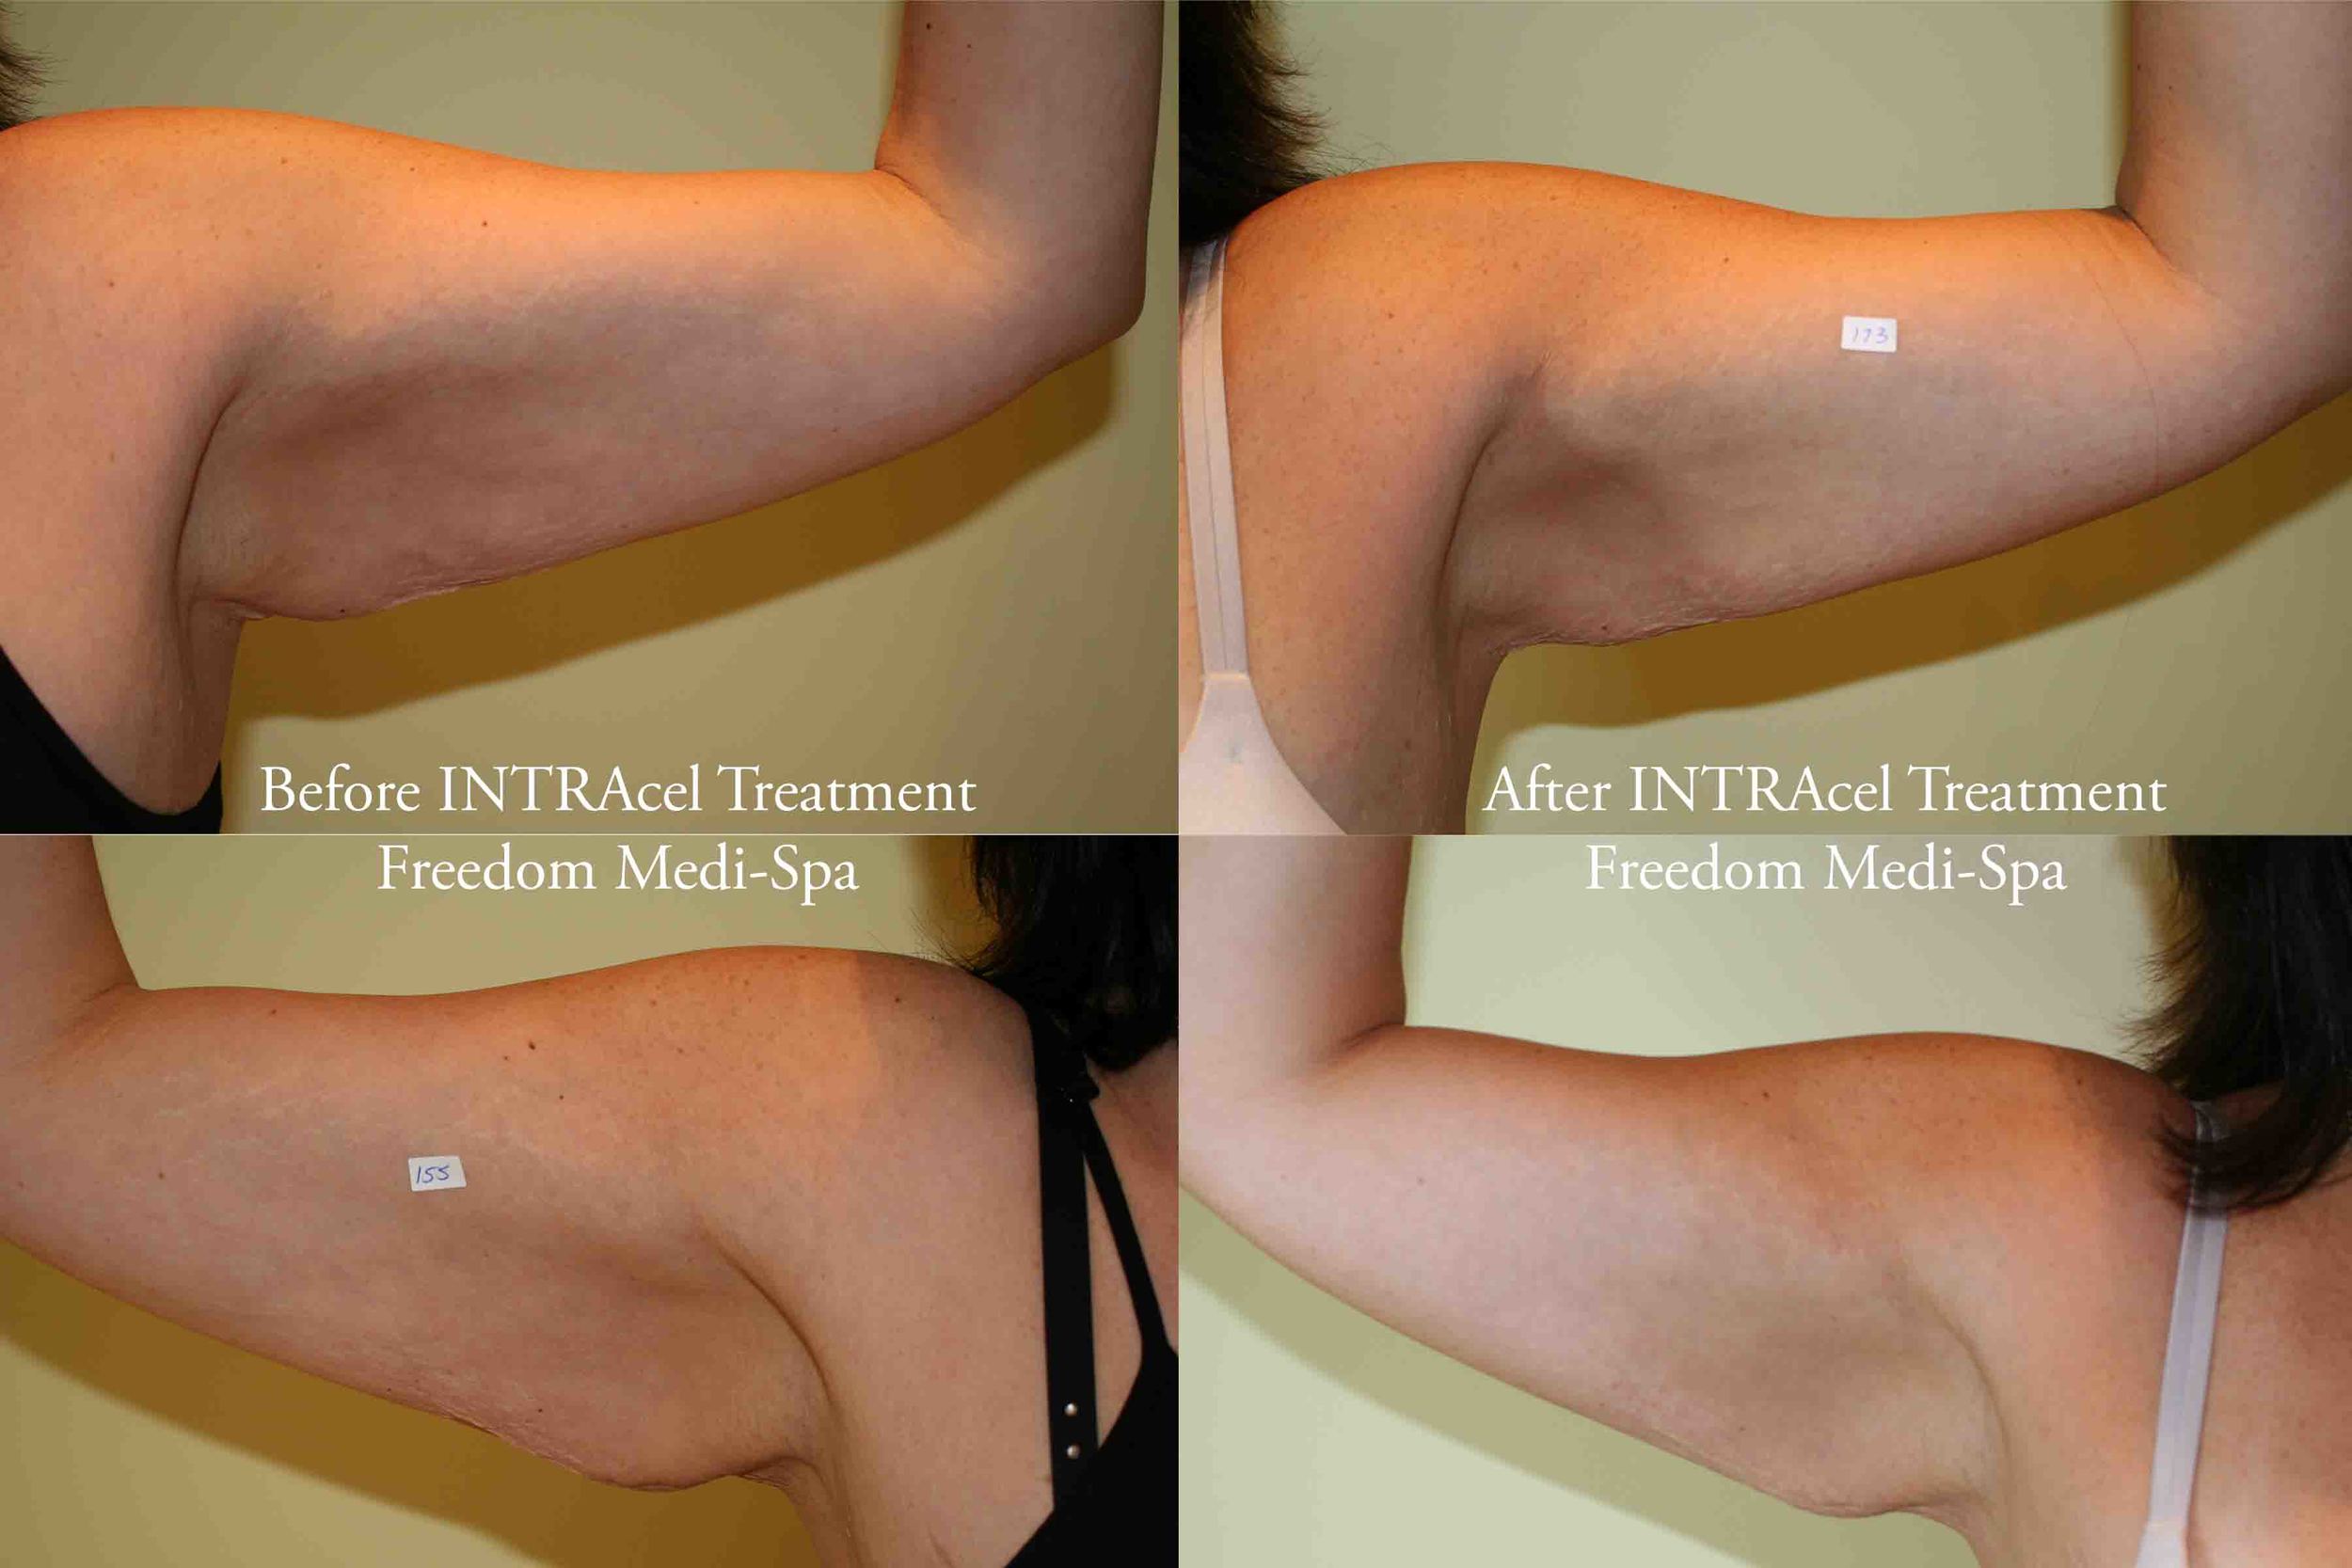 Intracel Before and After Arms Treatment.jpg